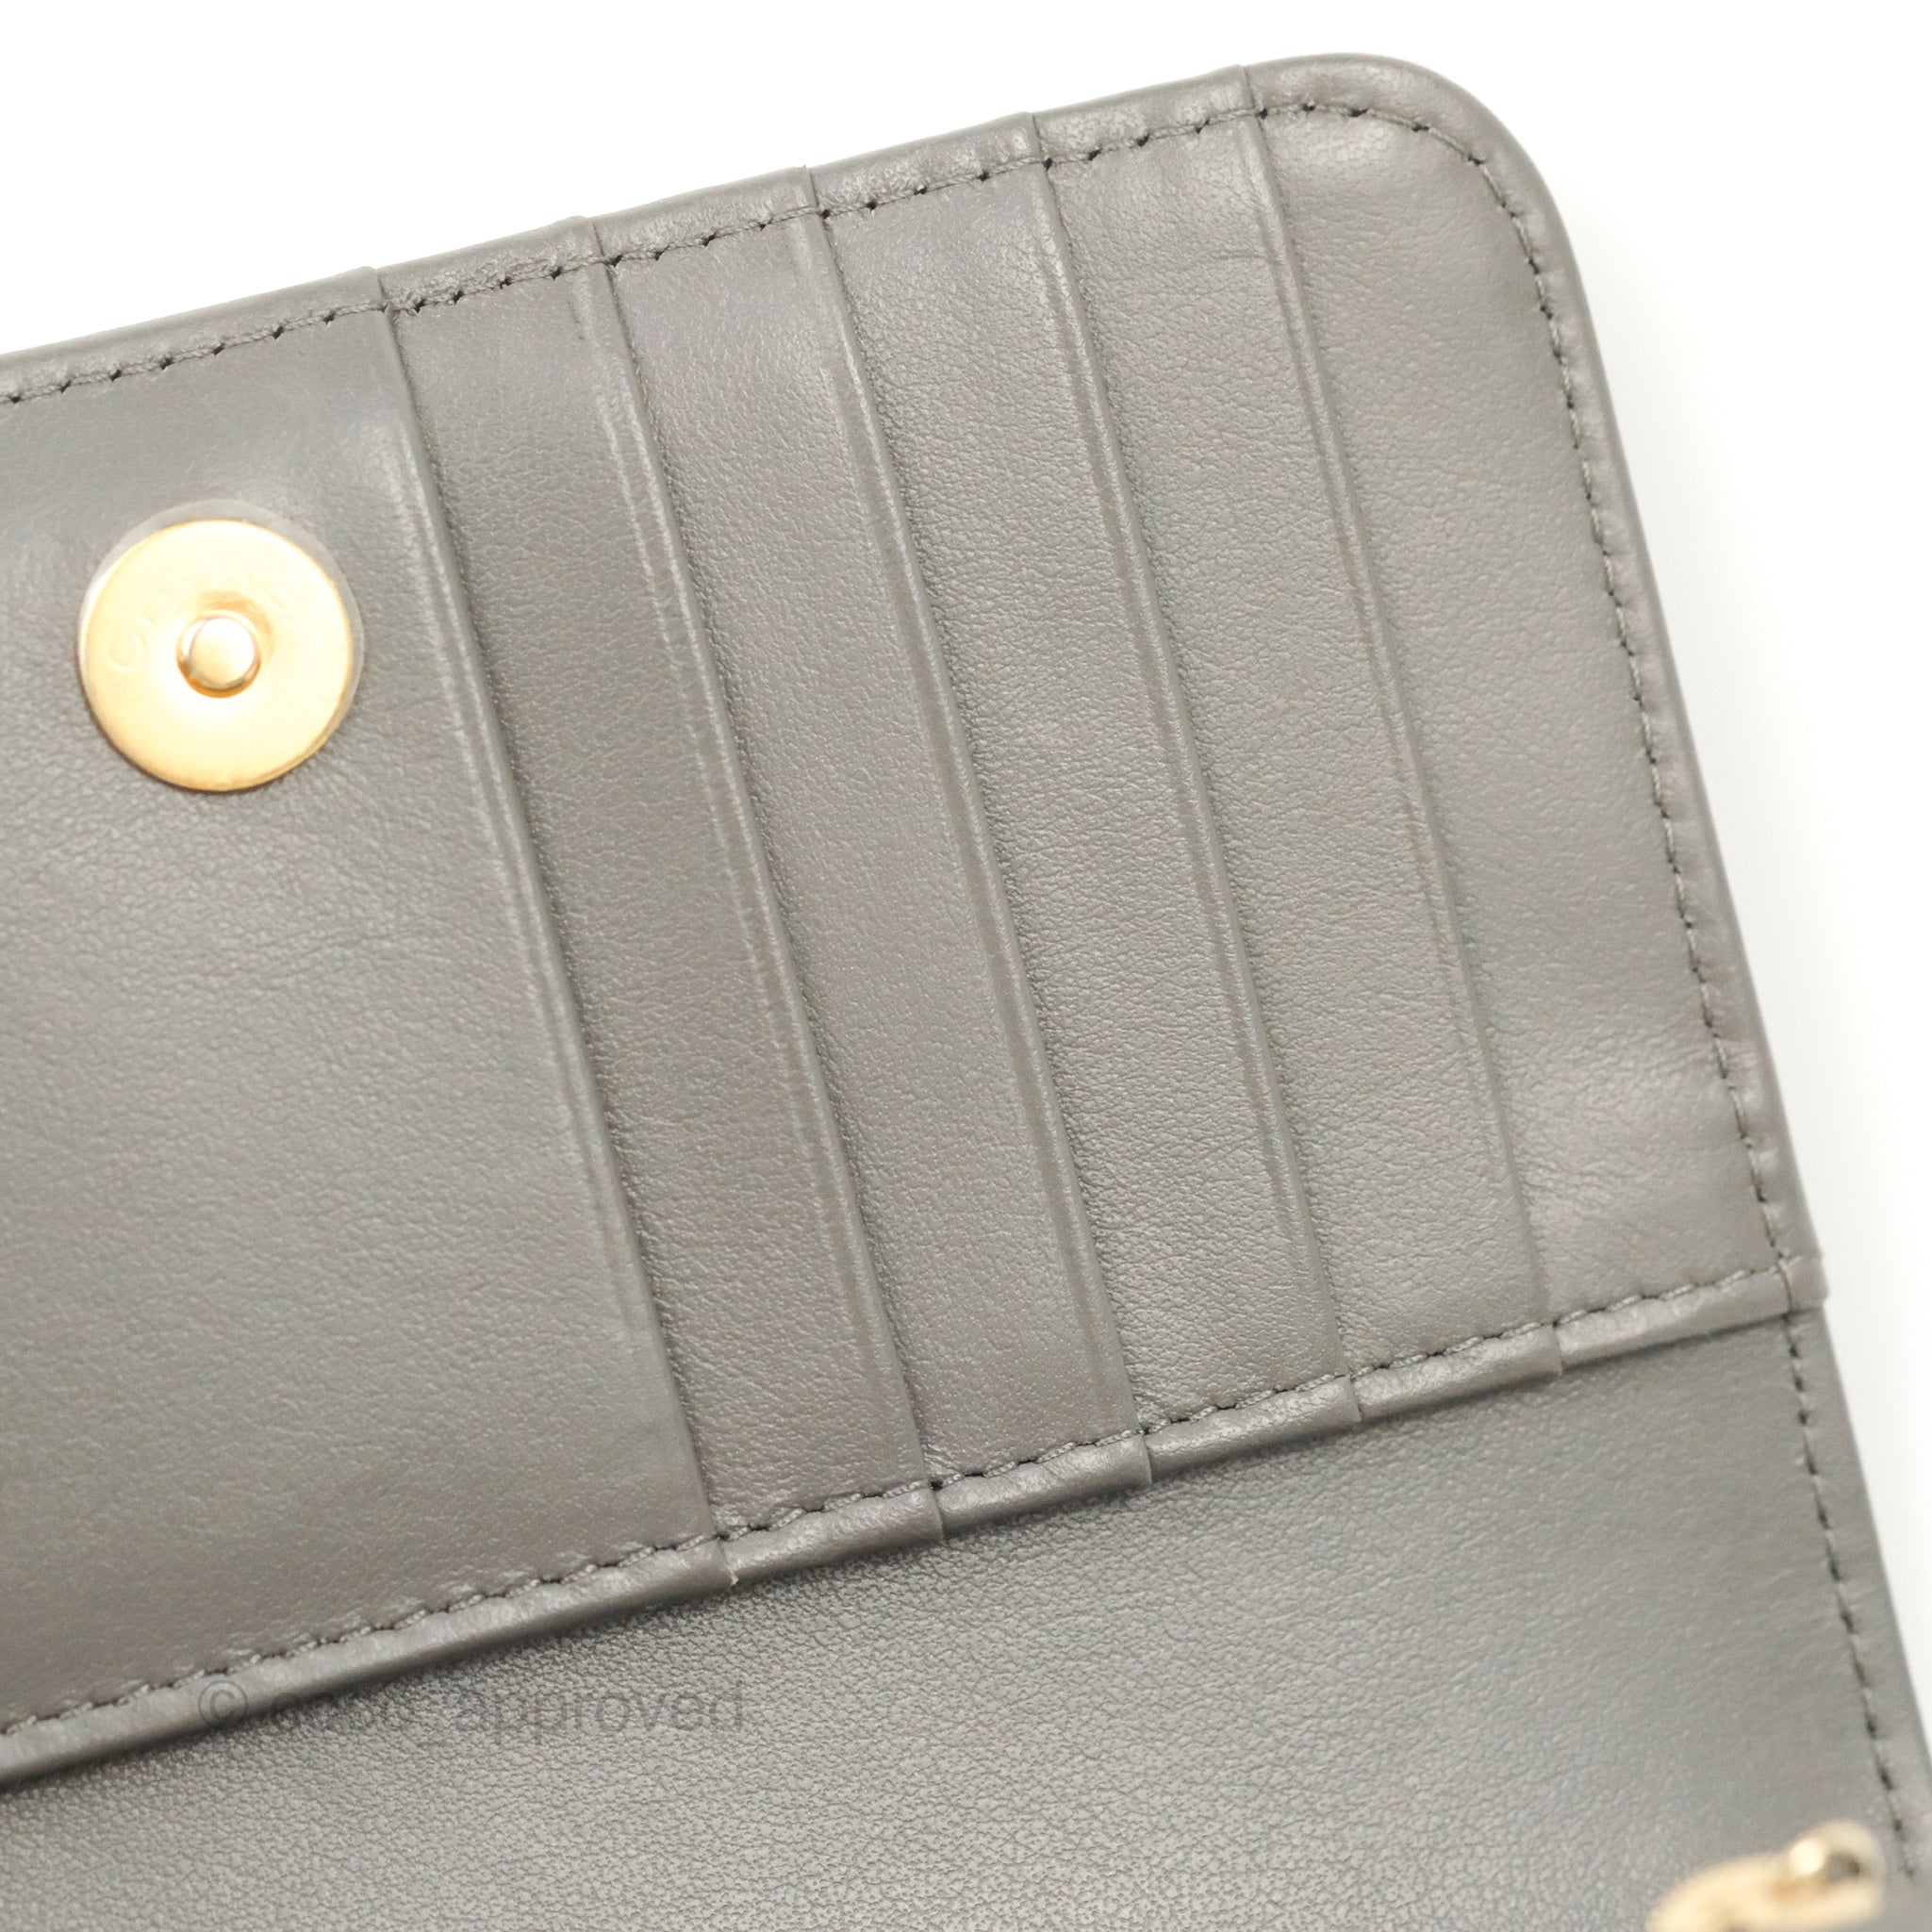 Tons of compartments…Smoke Grey Chanel Wallet from 2005 $2